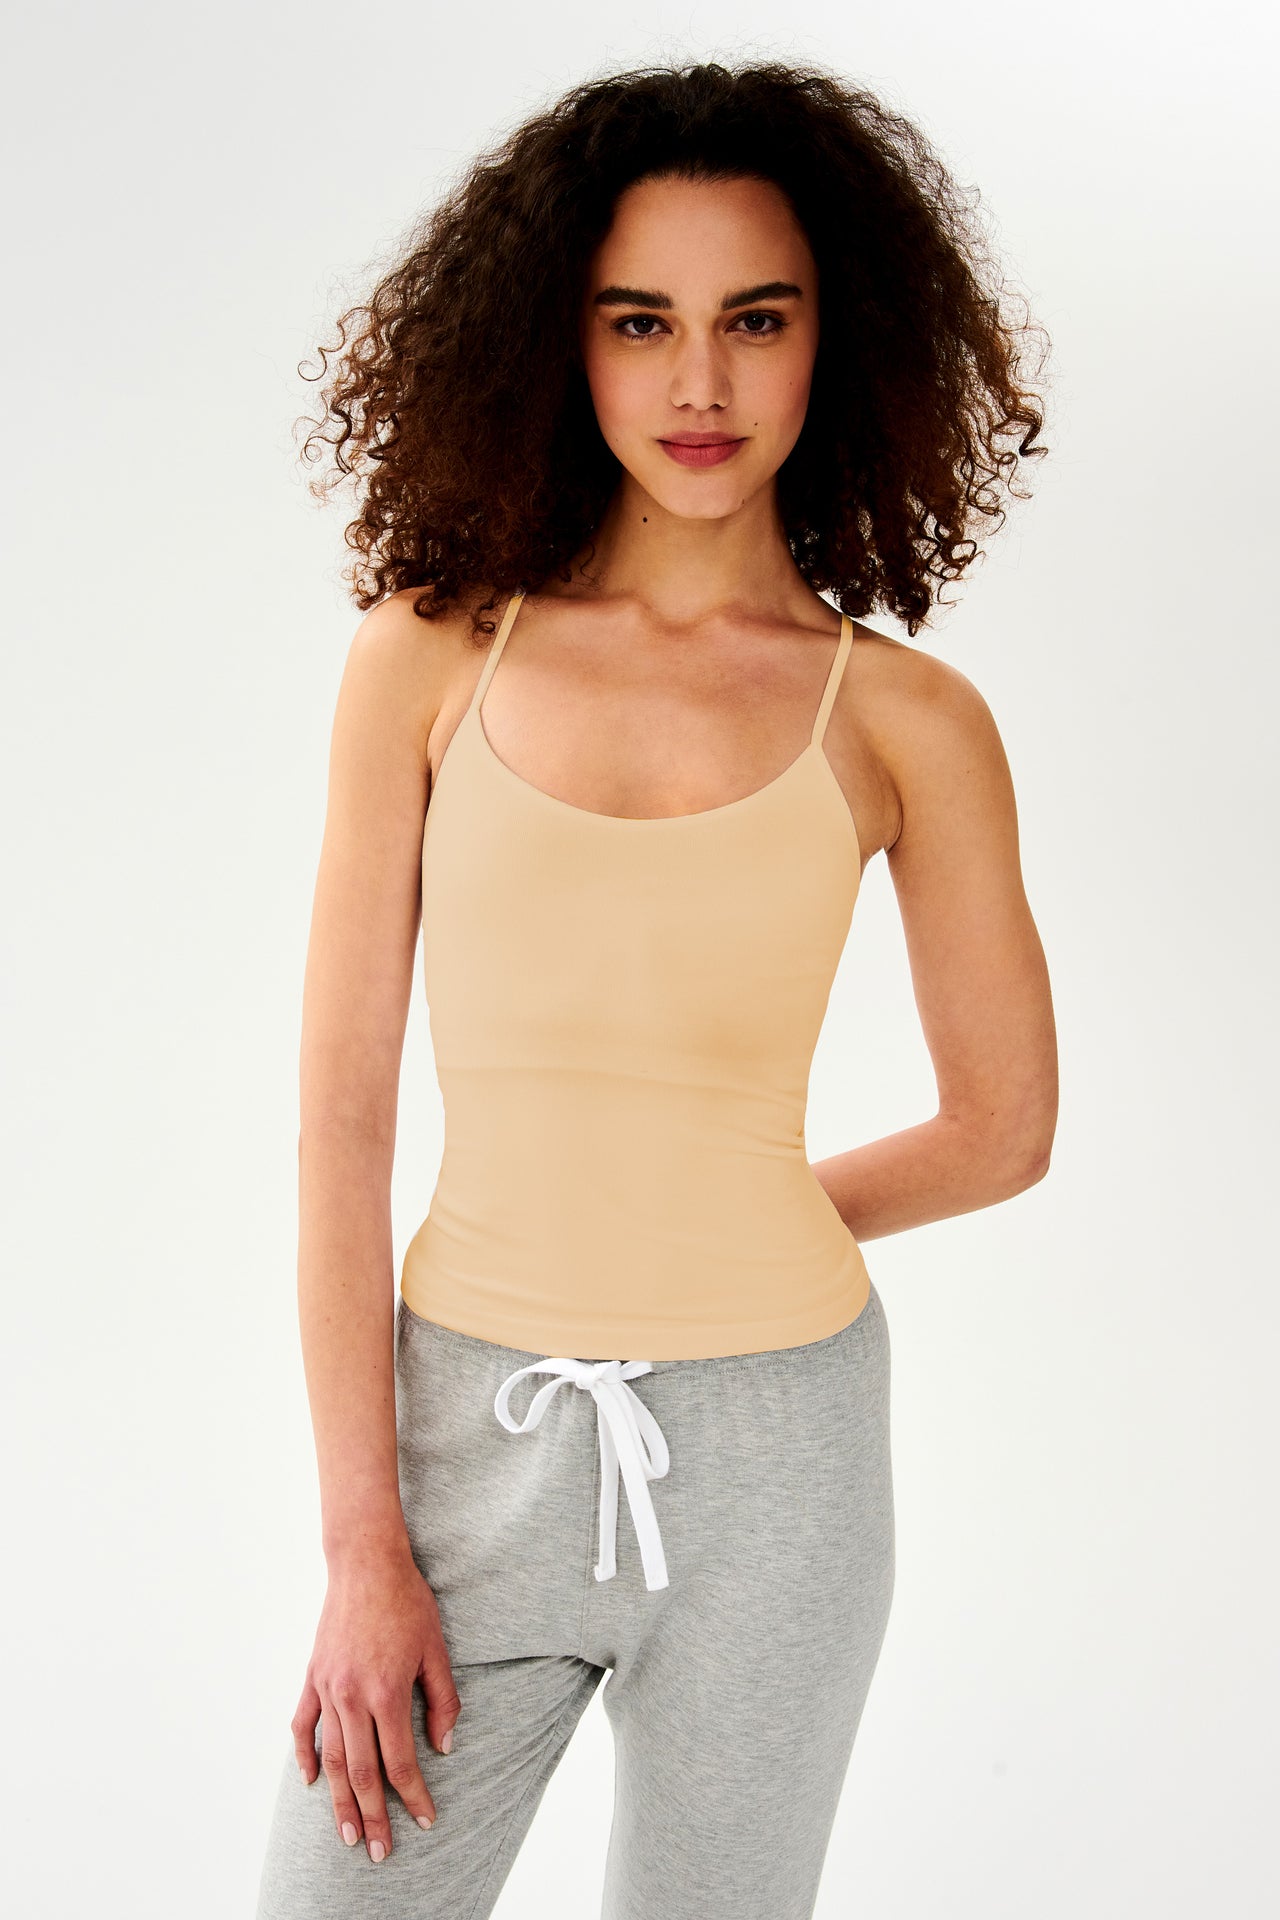 A woman in a SPLITS59 Loren Seamless Waist Length Tank - Nude with a built-in shelf bra and gray sweatpants.